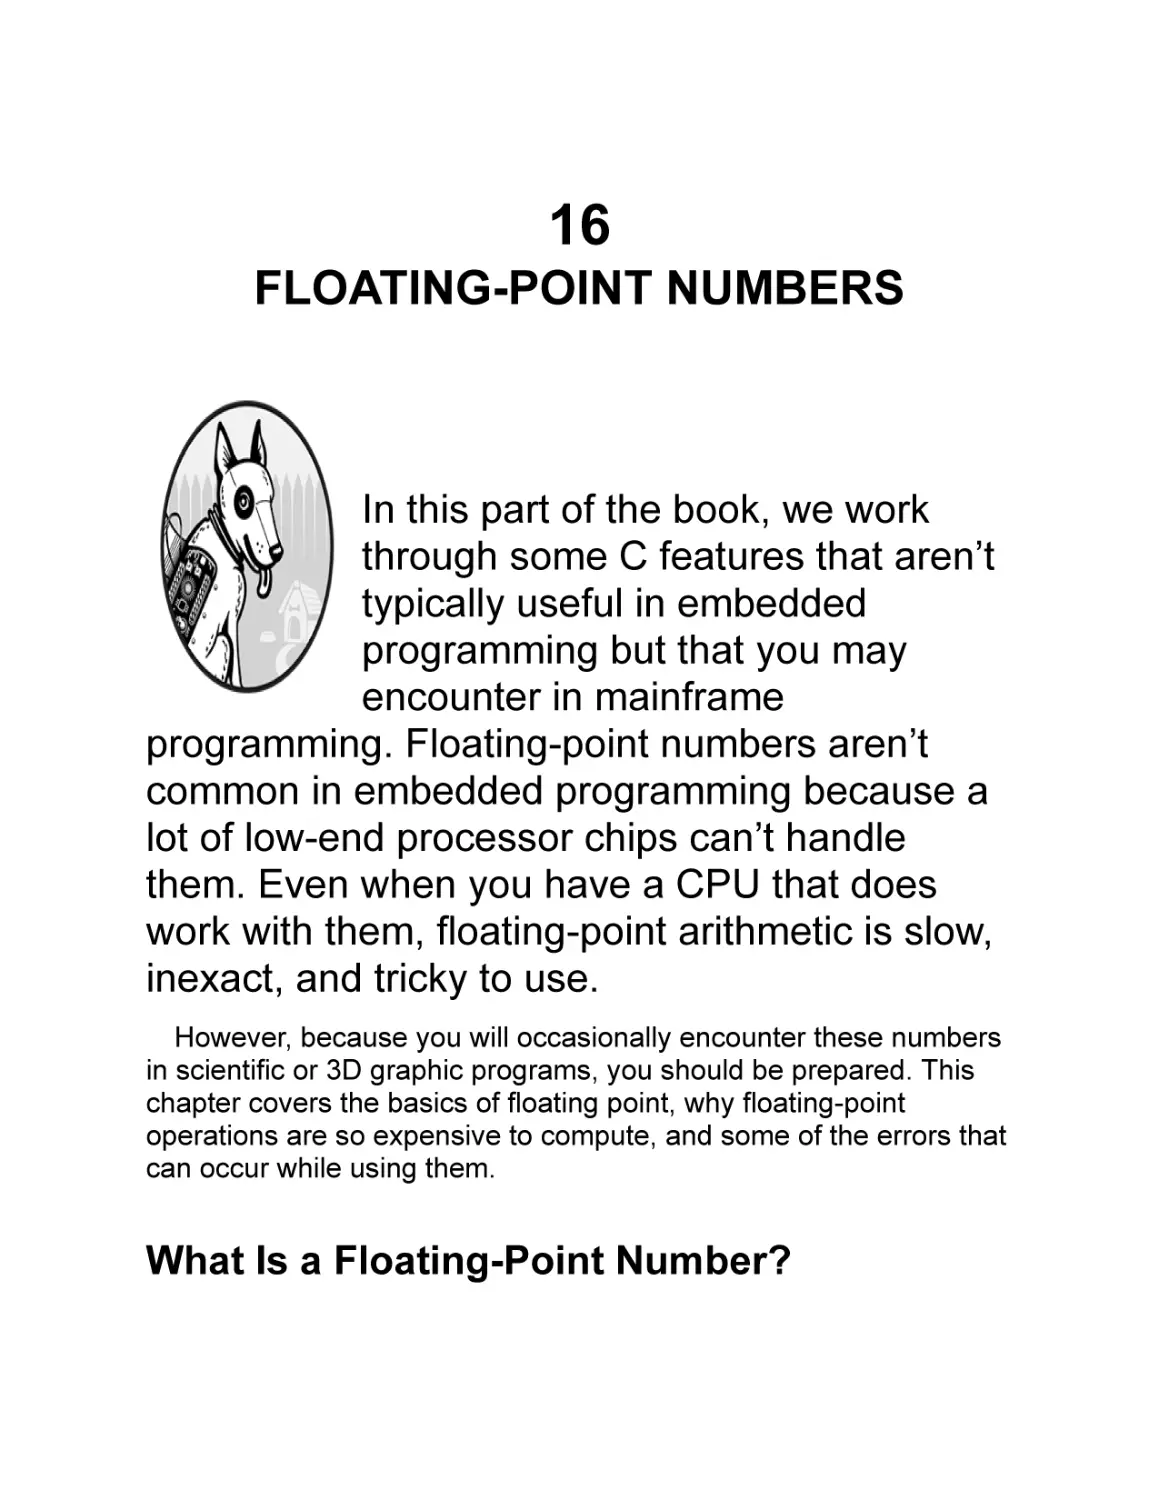 Chapter 16
What Is a Floating-Point Number?